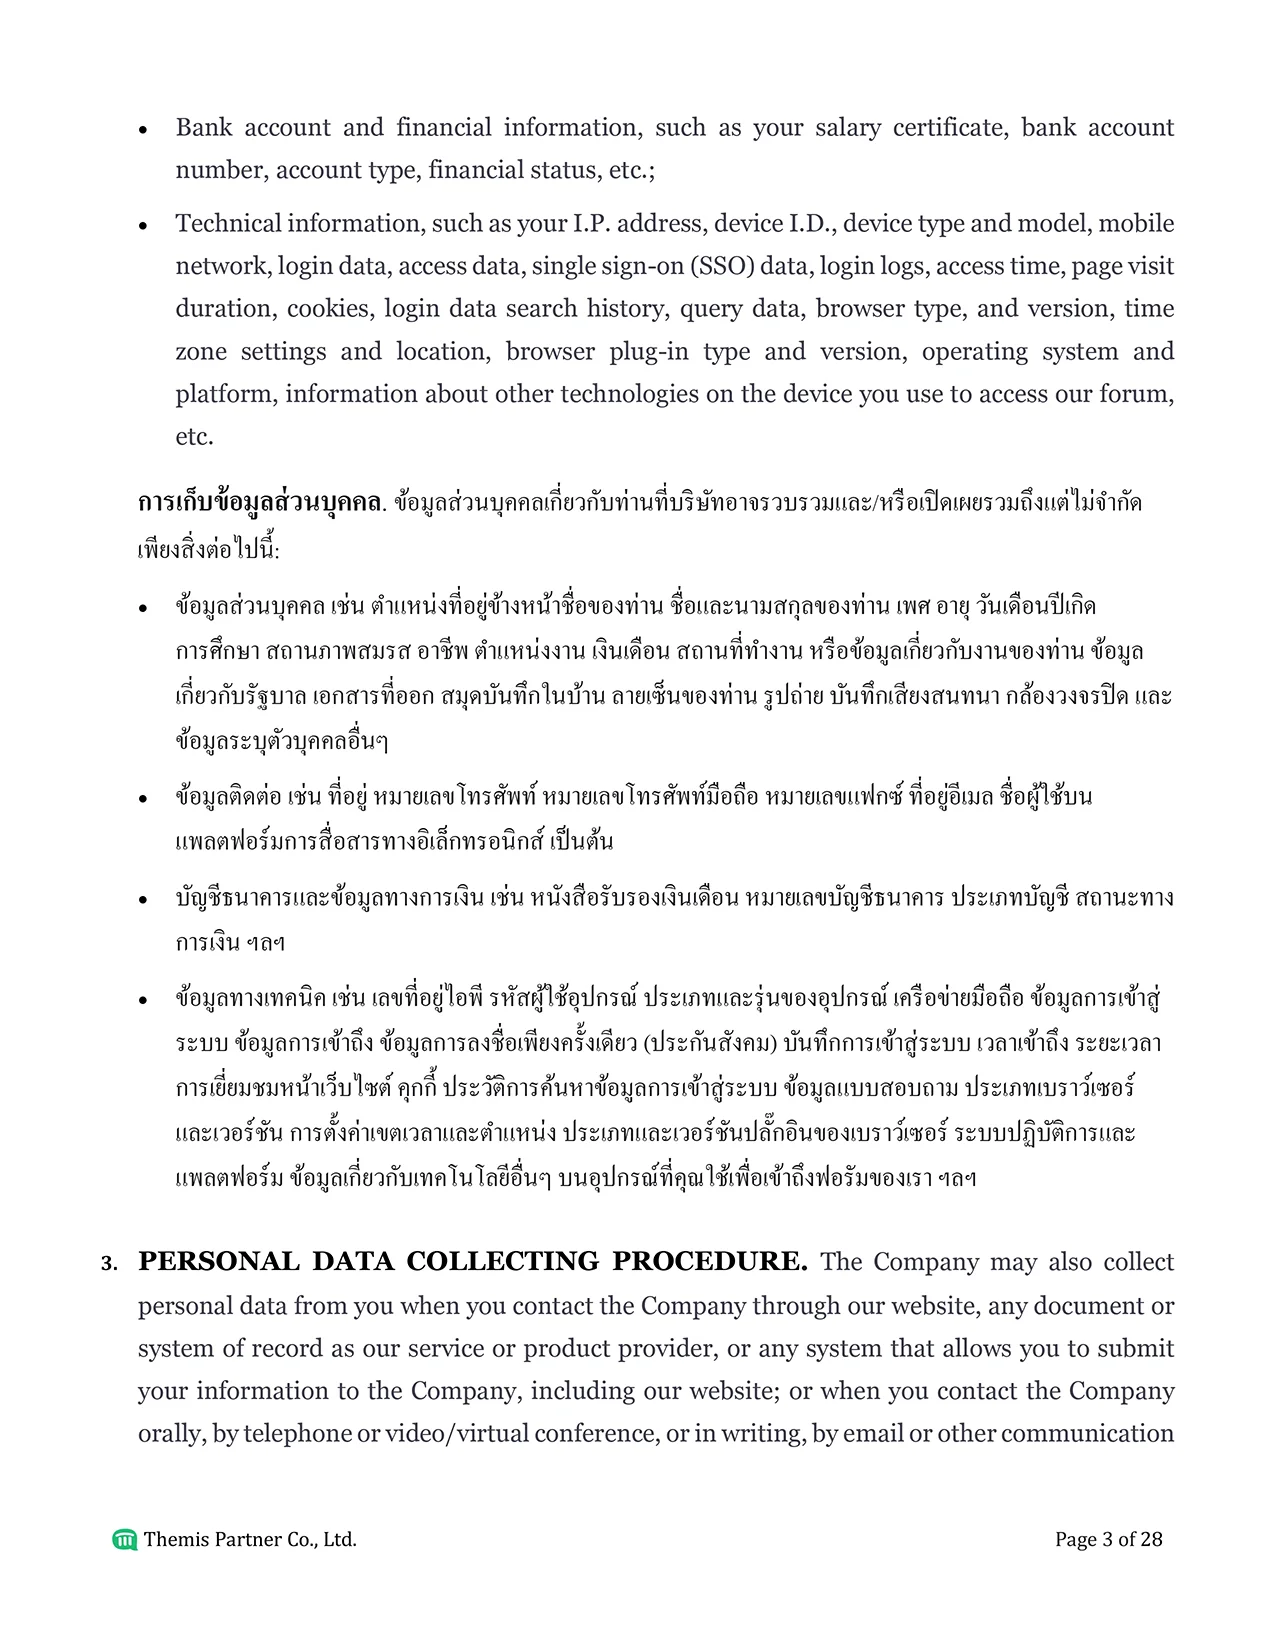 PDPA consent form and company policy Thailand 3